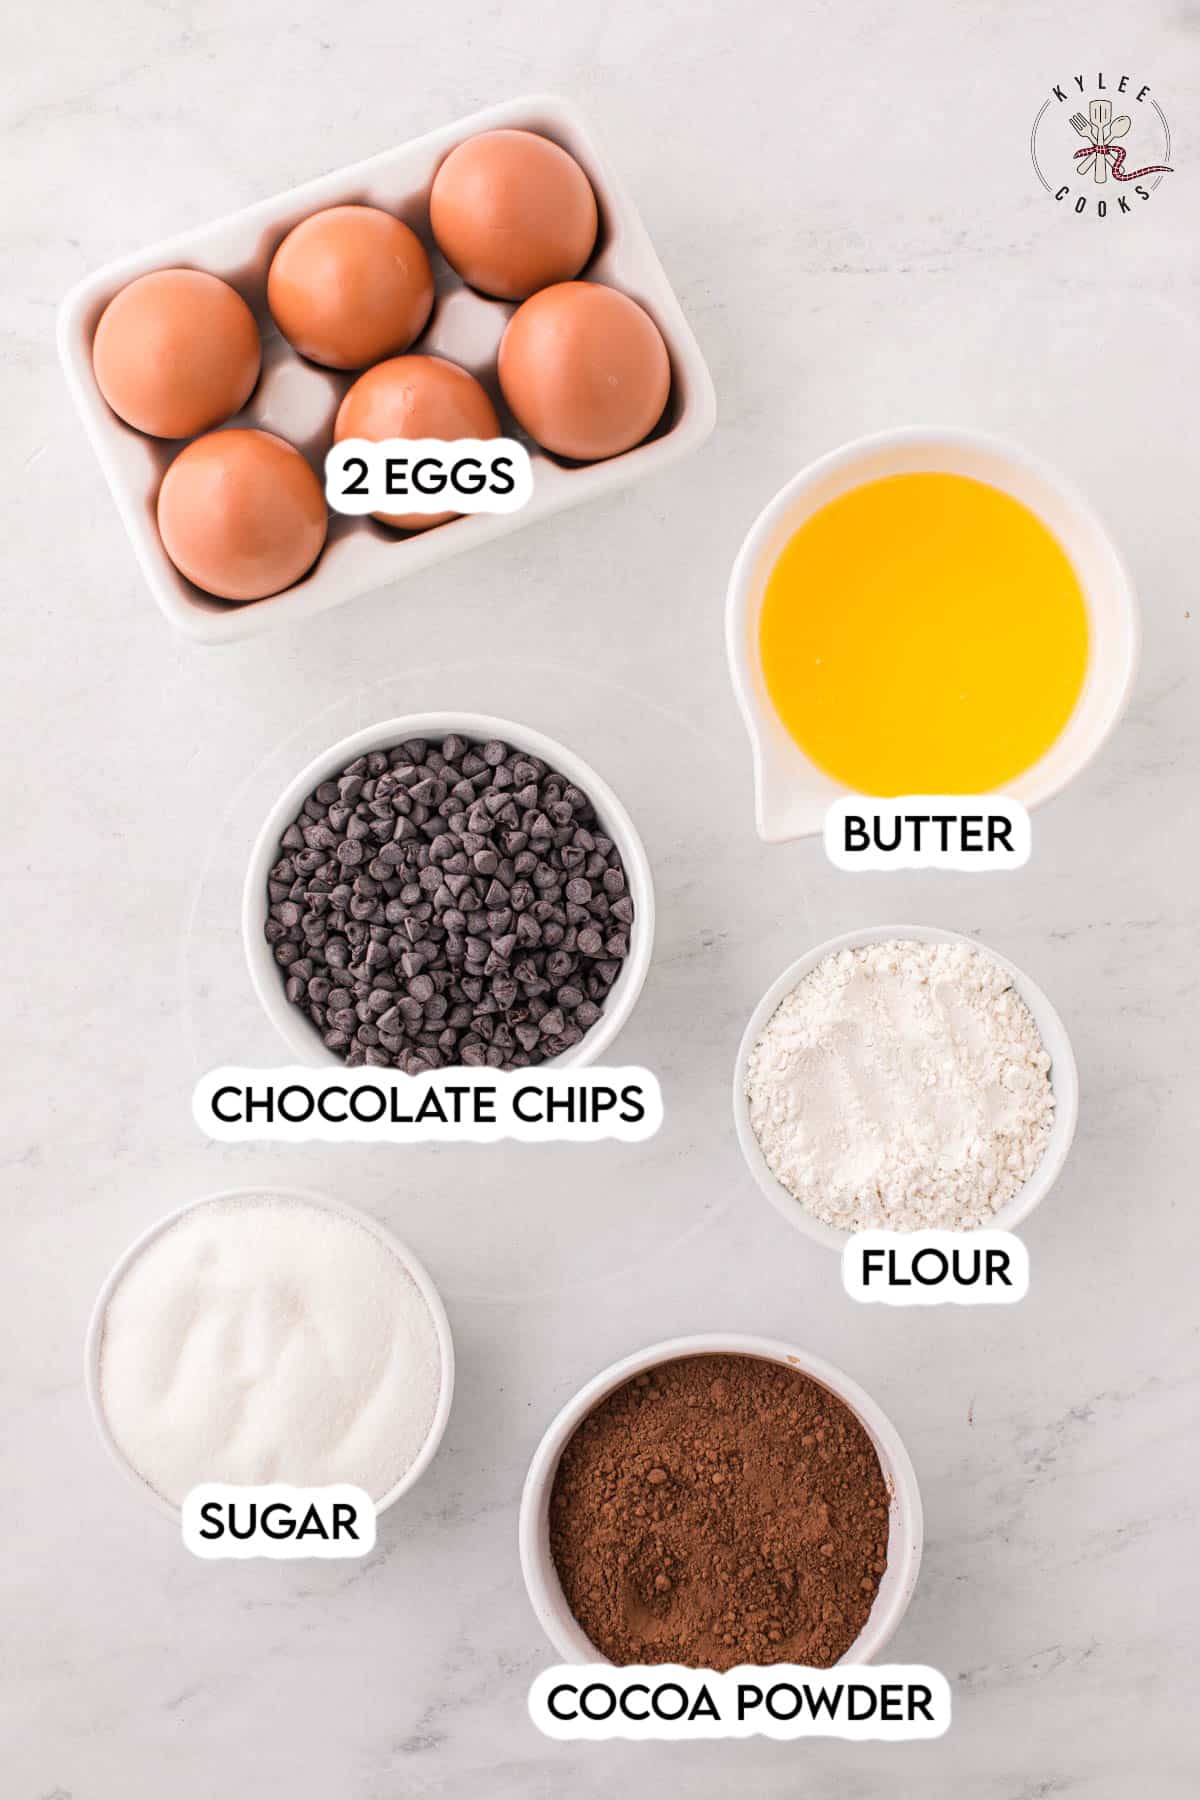 ingredients to make brownie bites laid out and labeled.